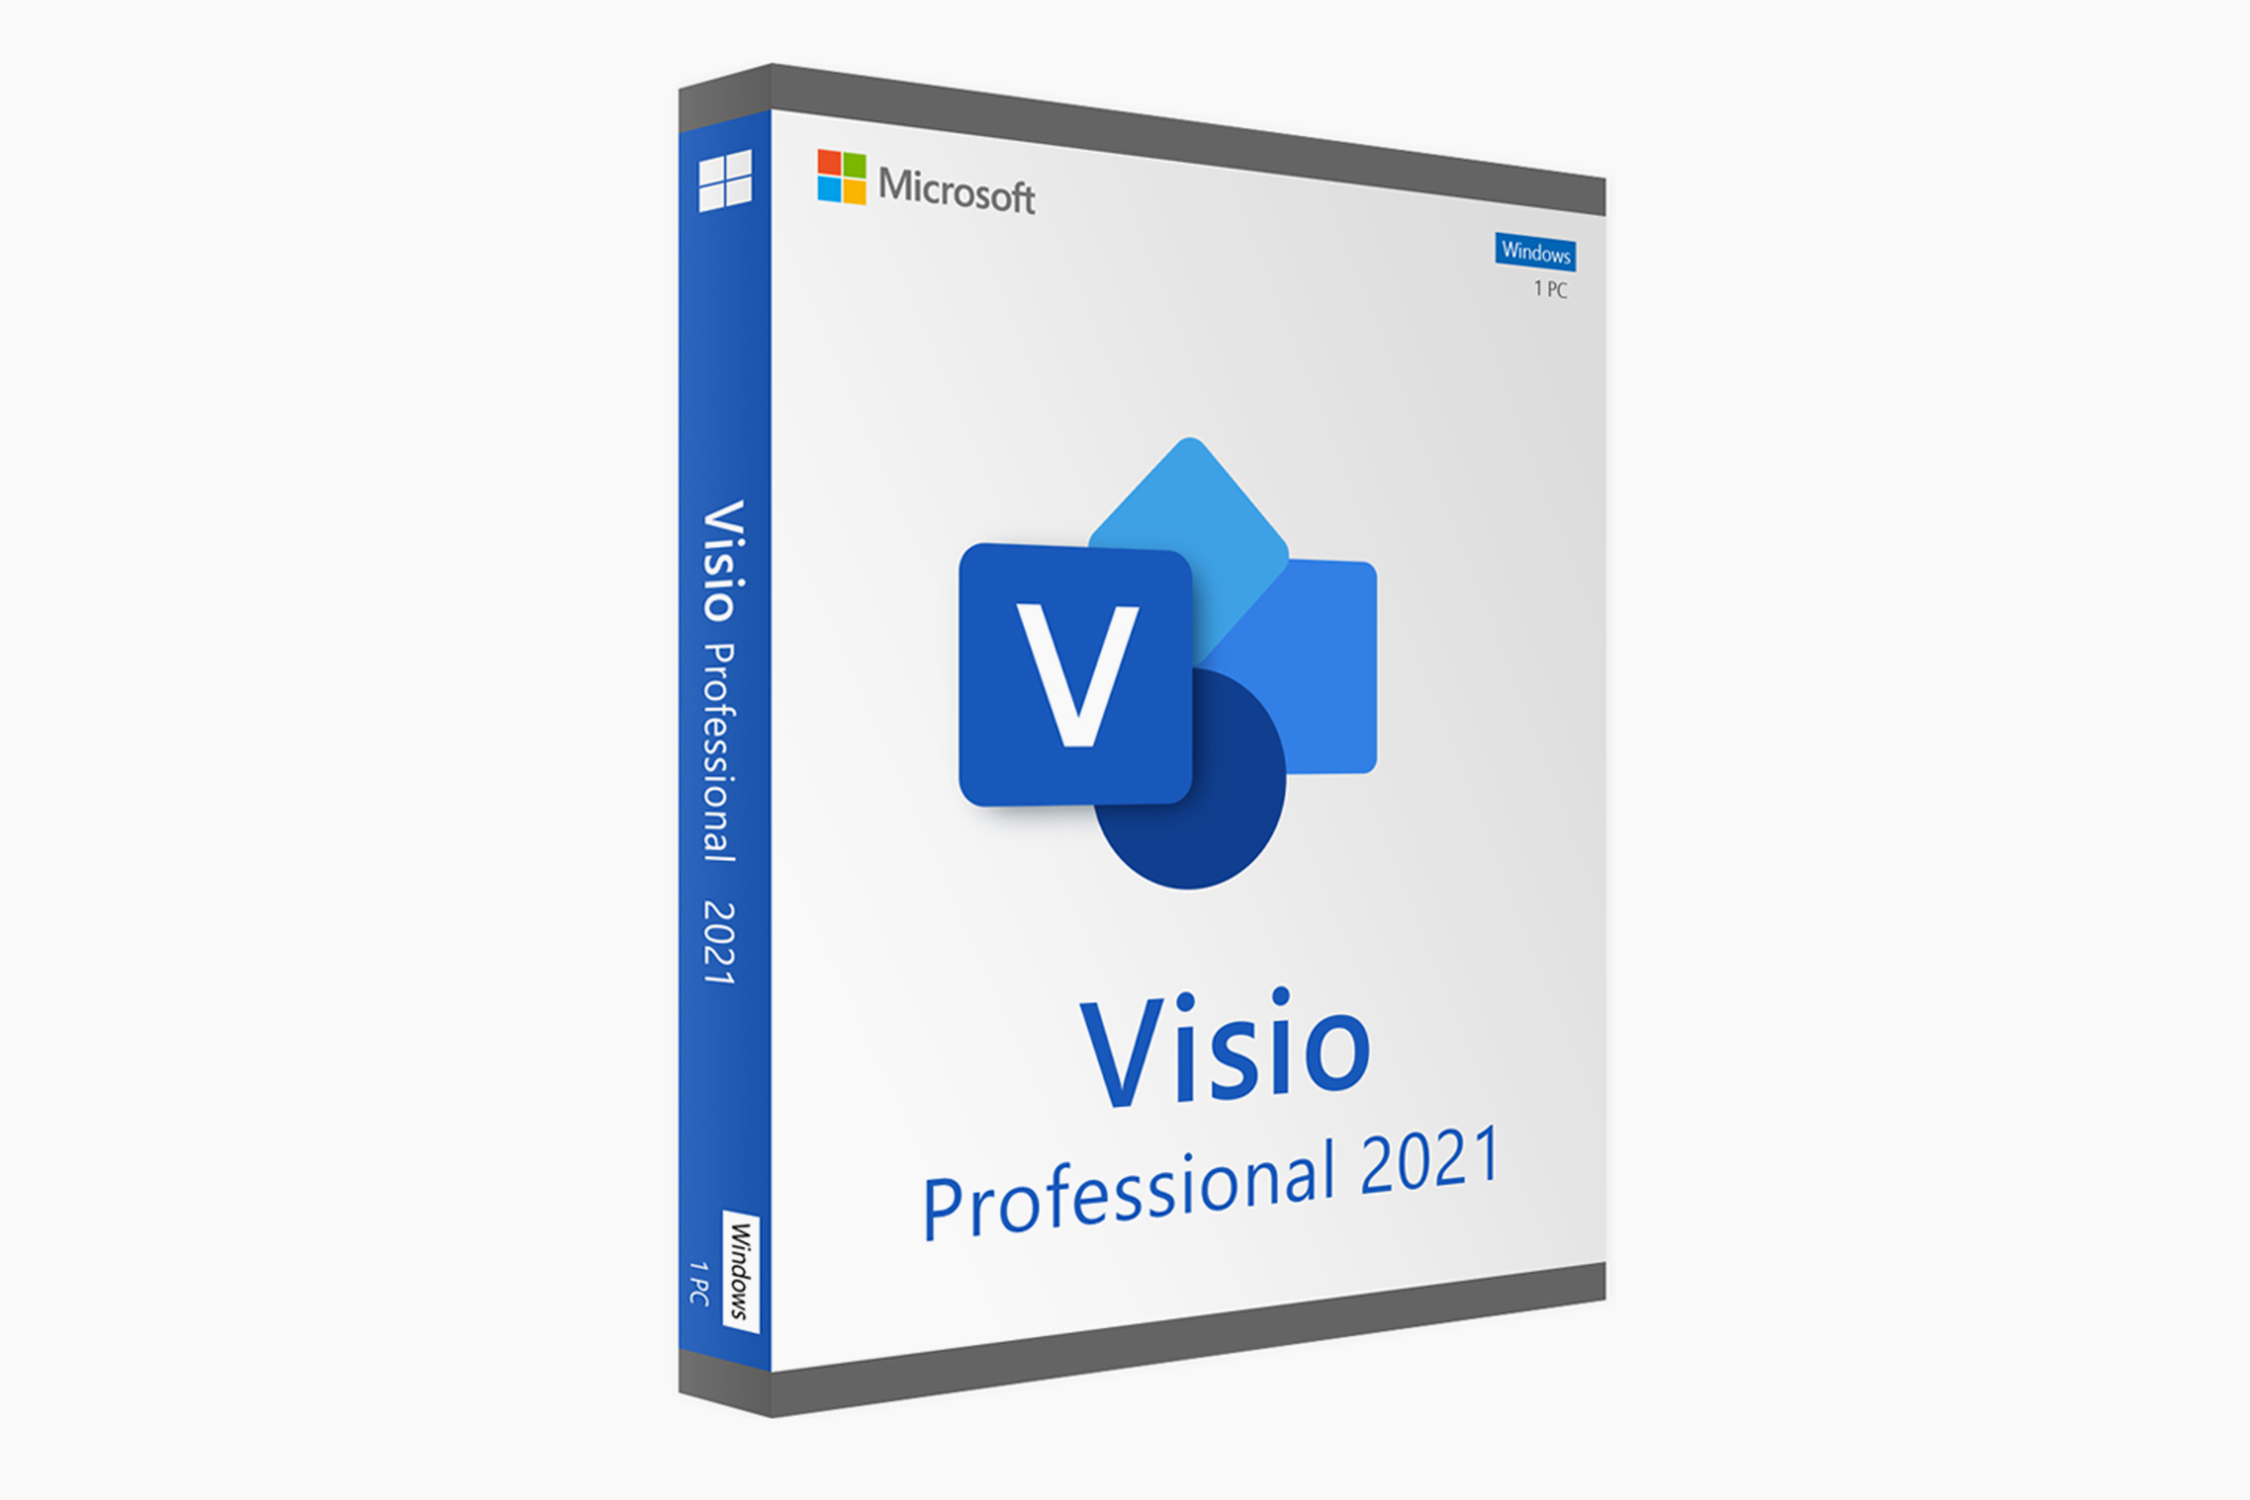 Get Microsoft Visio 2021 for just $20 this Father’s Day